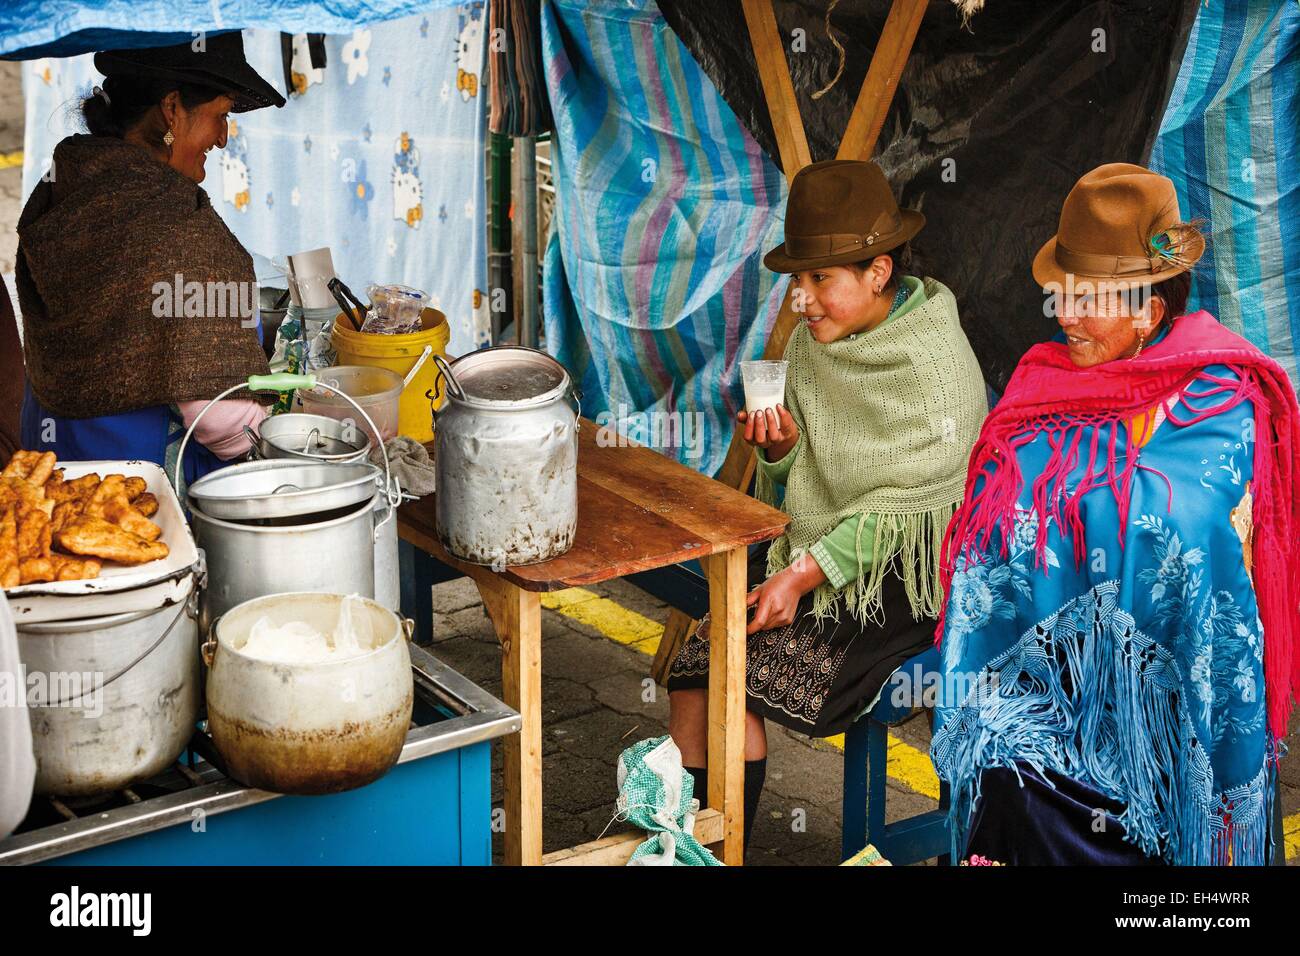 Ecuador, Cotopaxi, Zumbahua, day of the village of Zumbahua market, peasants lunching on a market stall Stock Photo